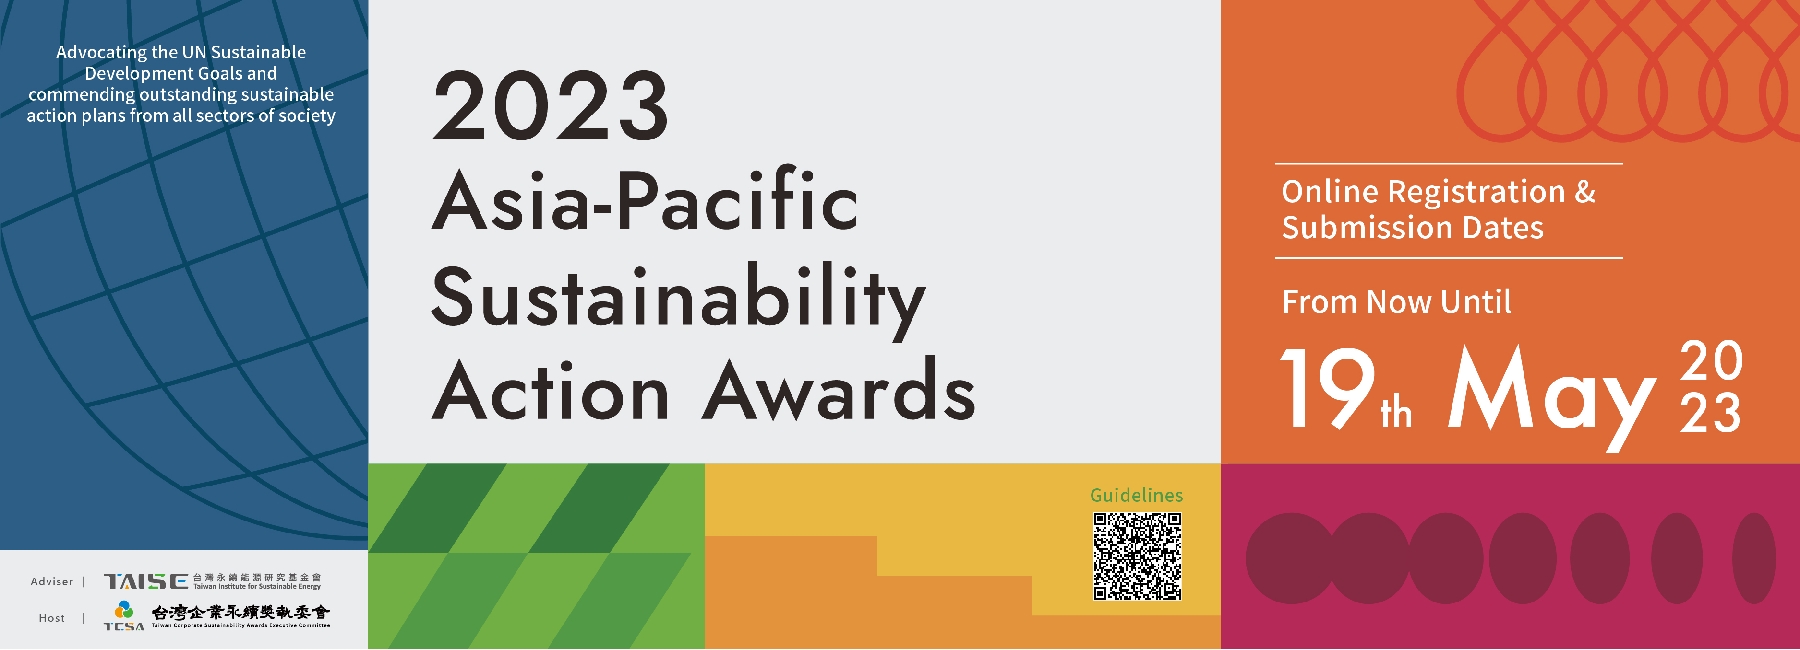 2023 Asia-Pacific Sustainability Action Awards